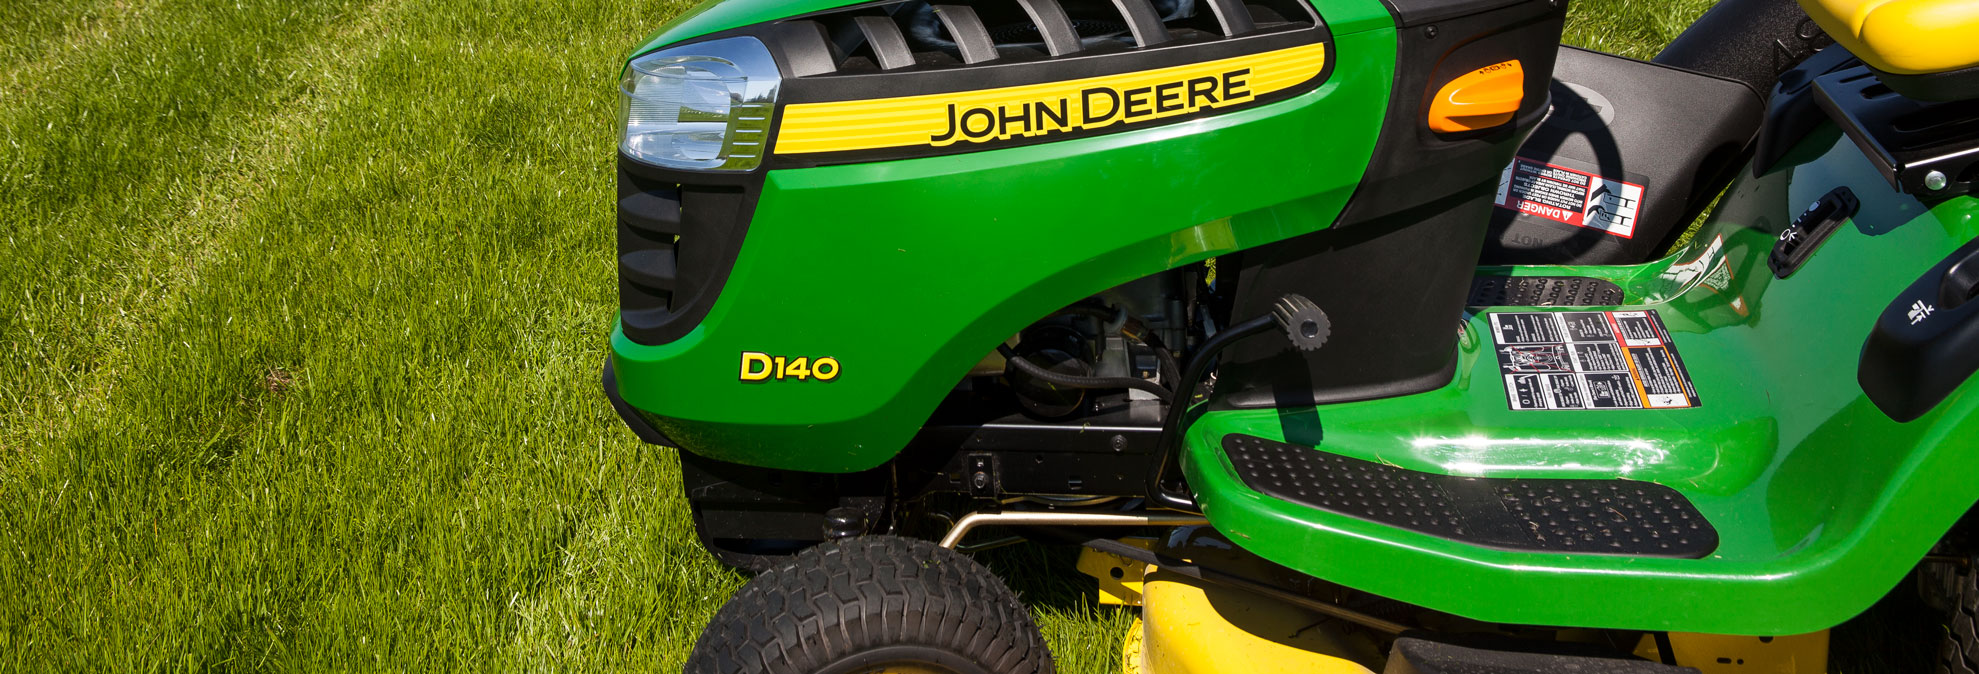 When to Find the Best Sales on a Riding Lawn Mower Consumer Reports